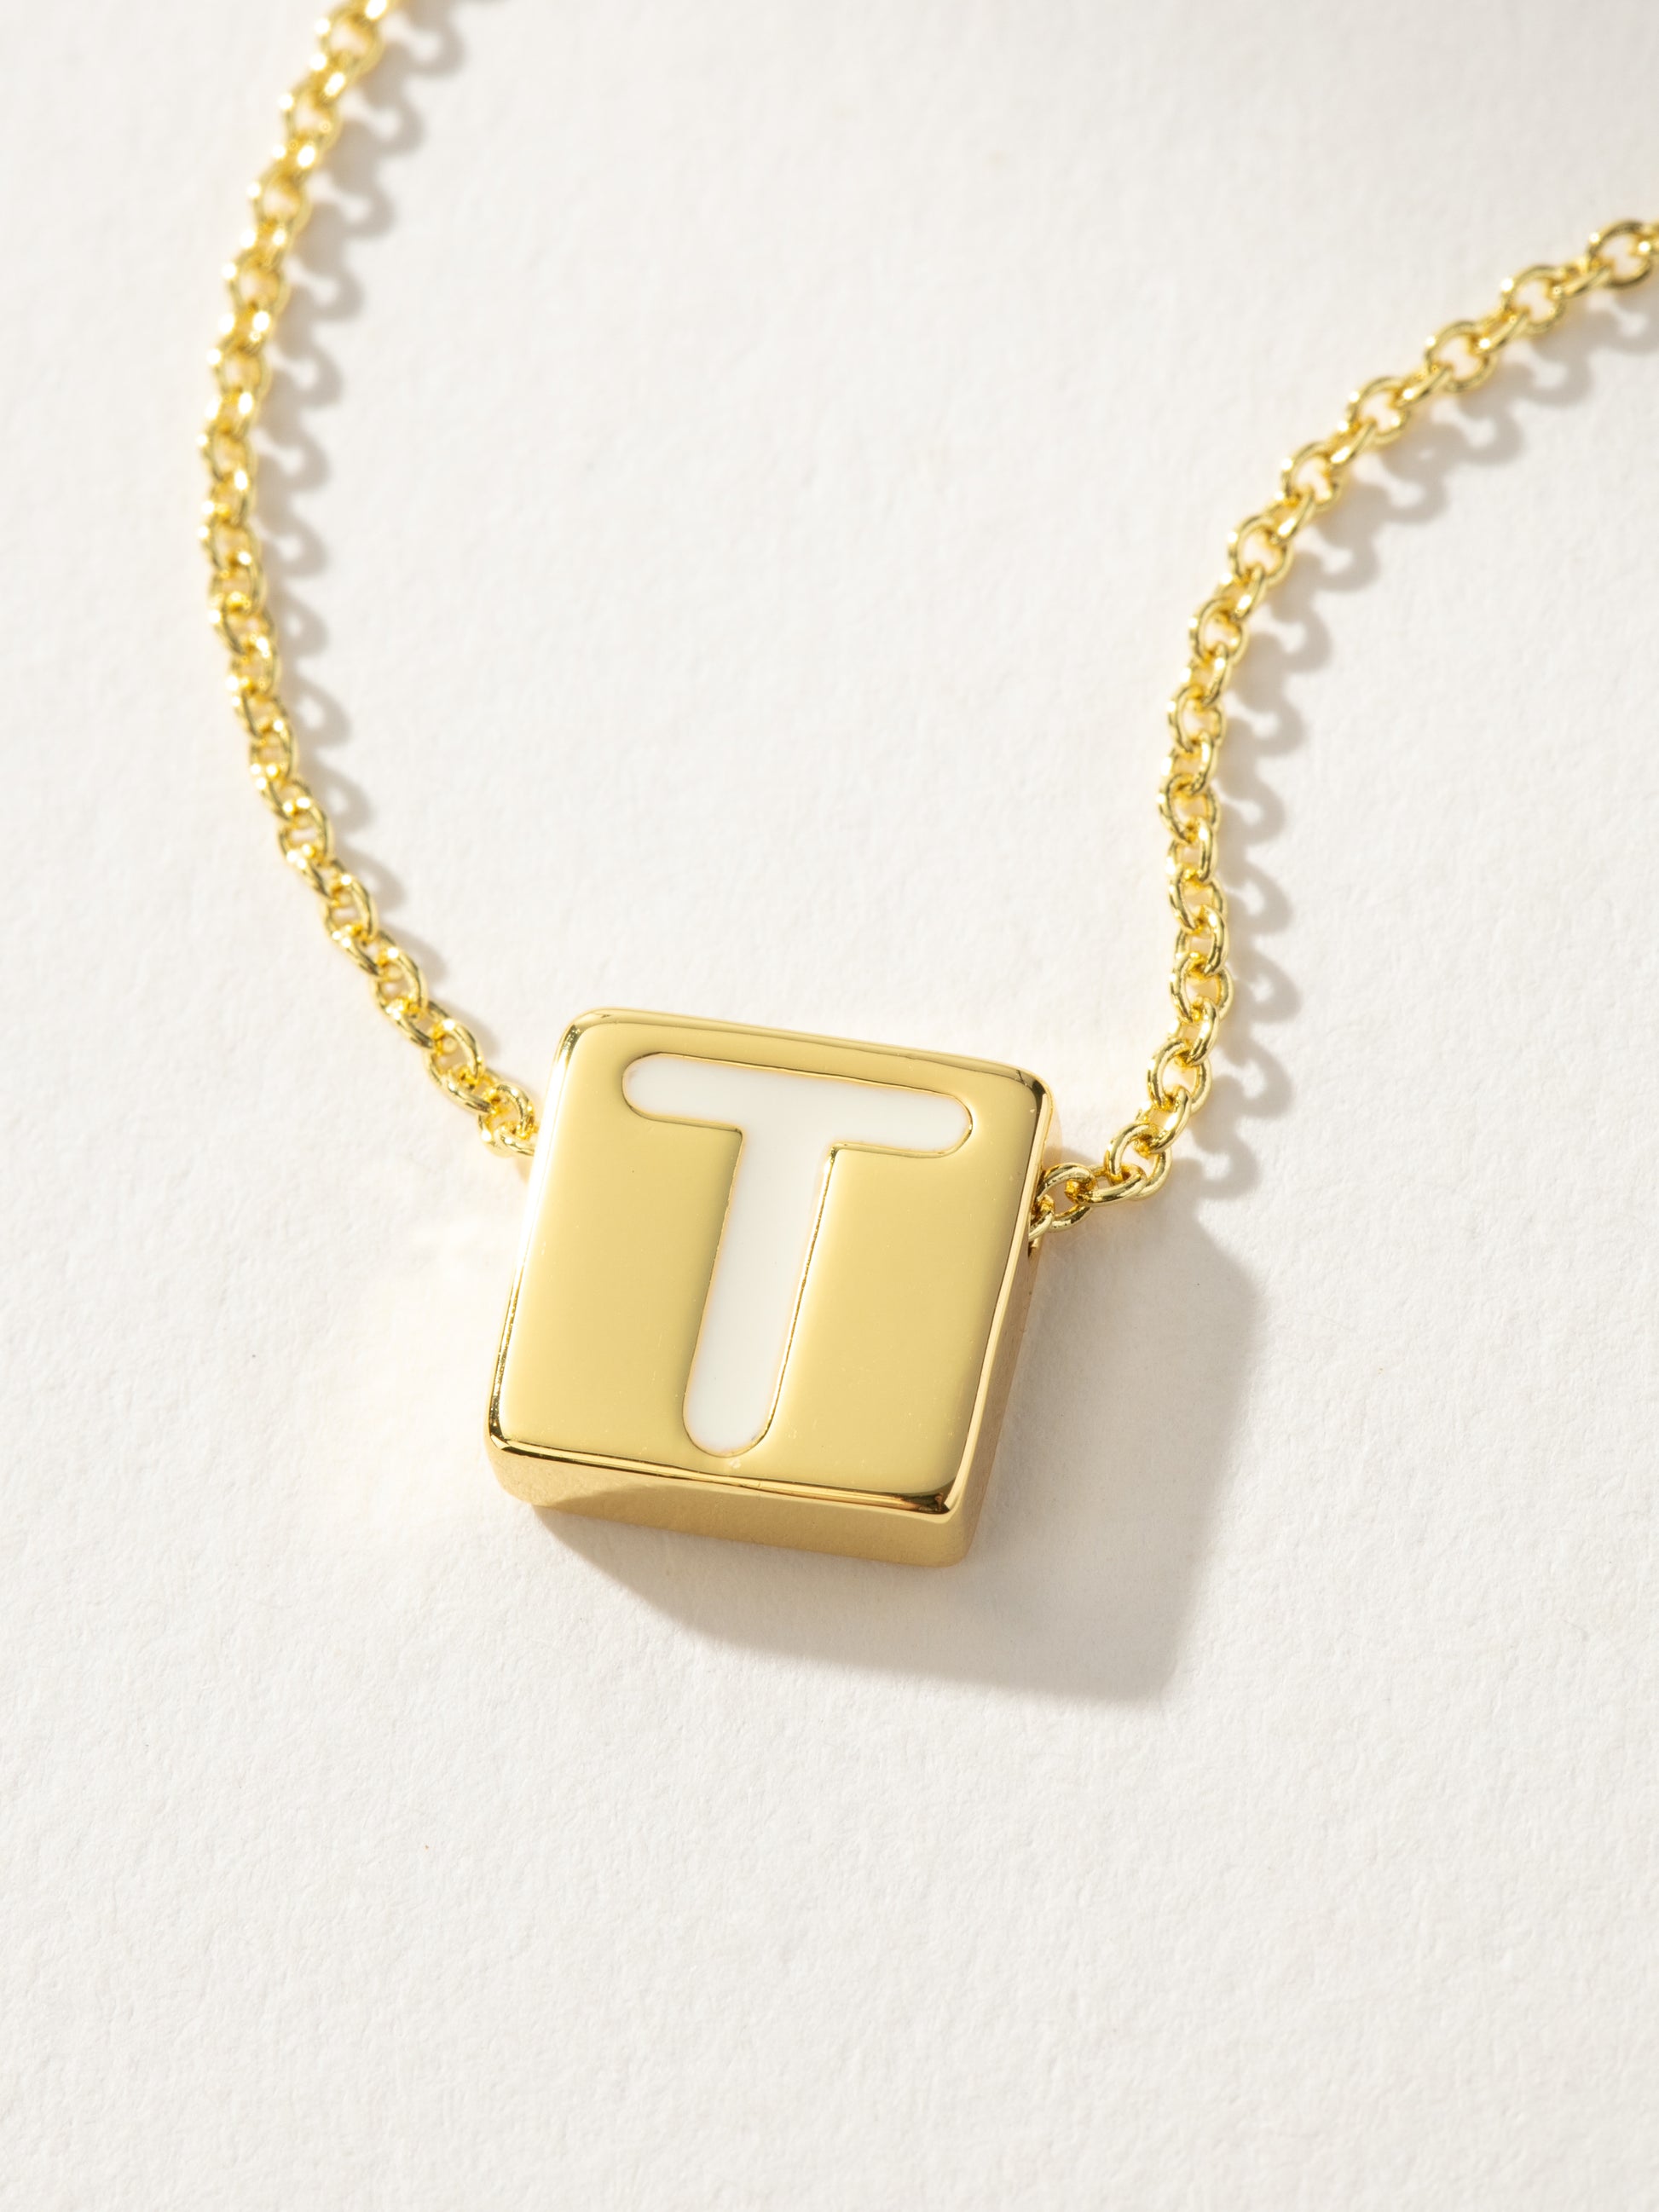 Bold Letter Necklace | Gold T | Product Detail Image | Uncommon James